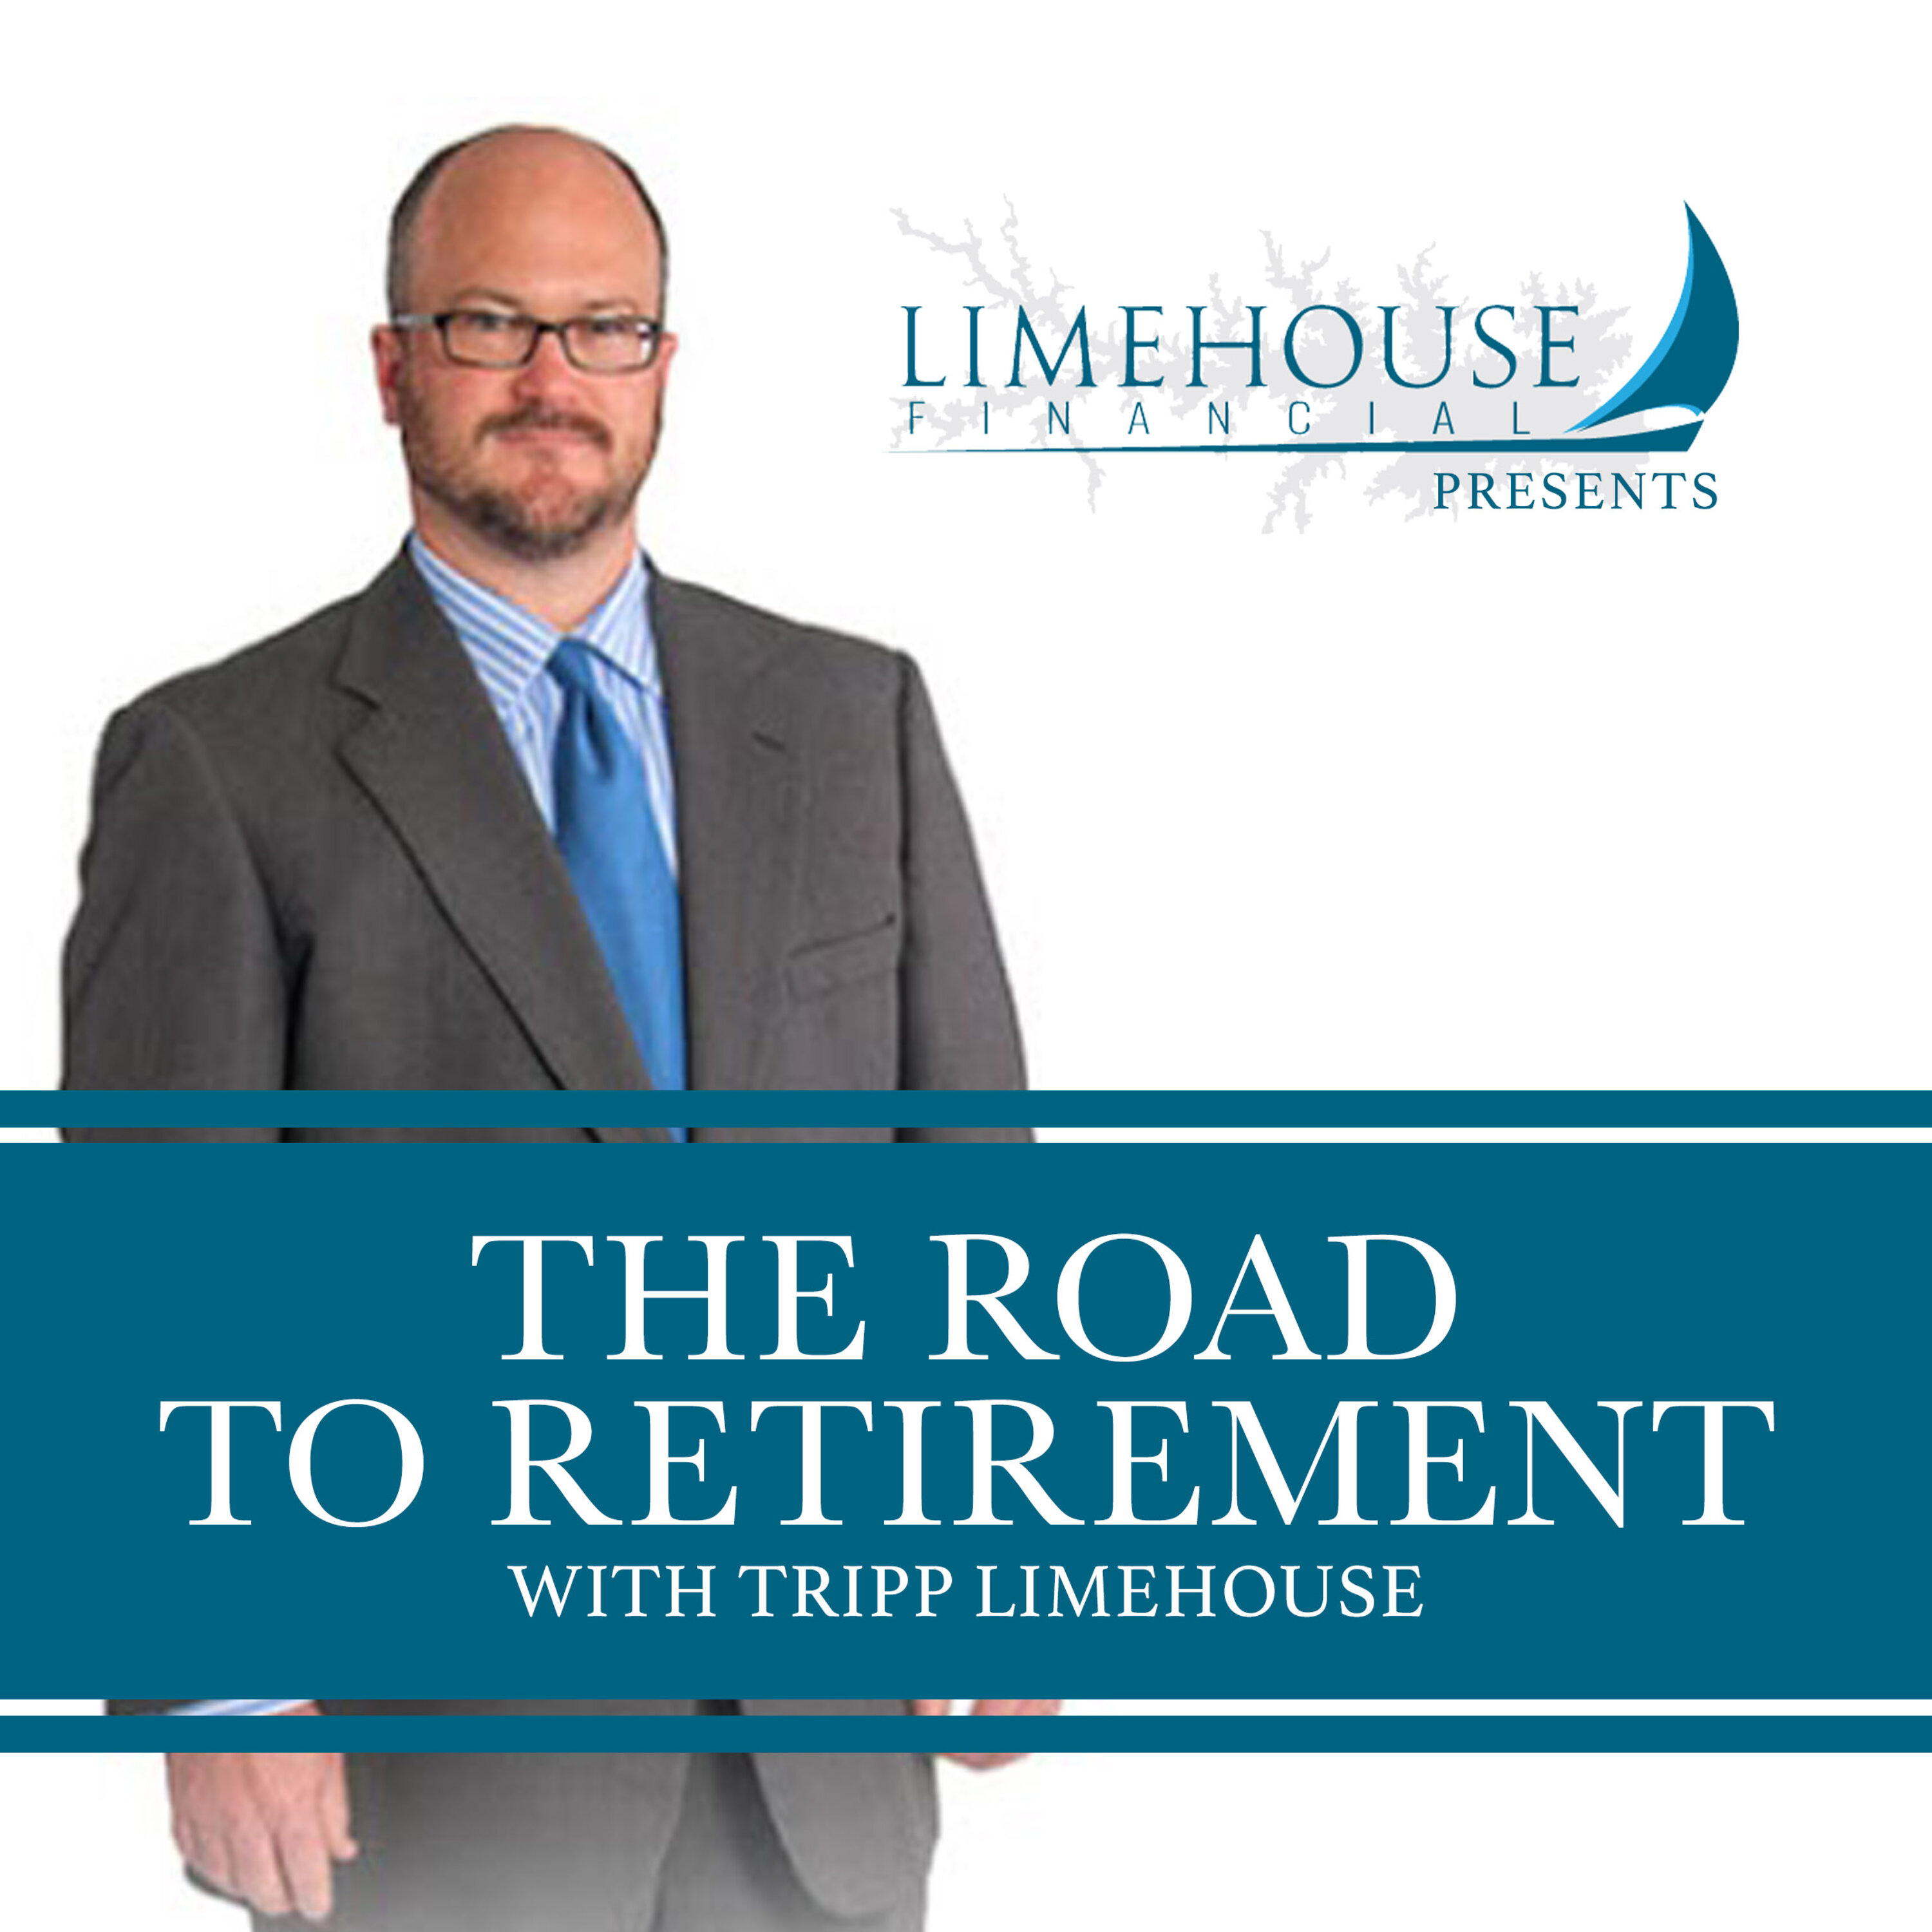 Tripp Limehouse and Steve Sedahl discuss the importance of involving an expert in financial discussions, especially when it comes to retirement planning.